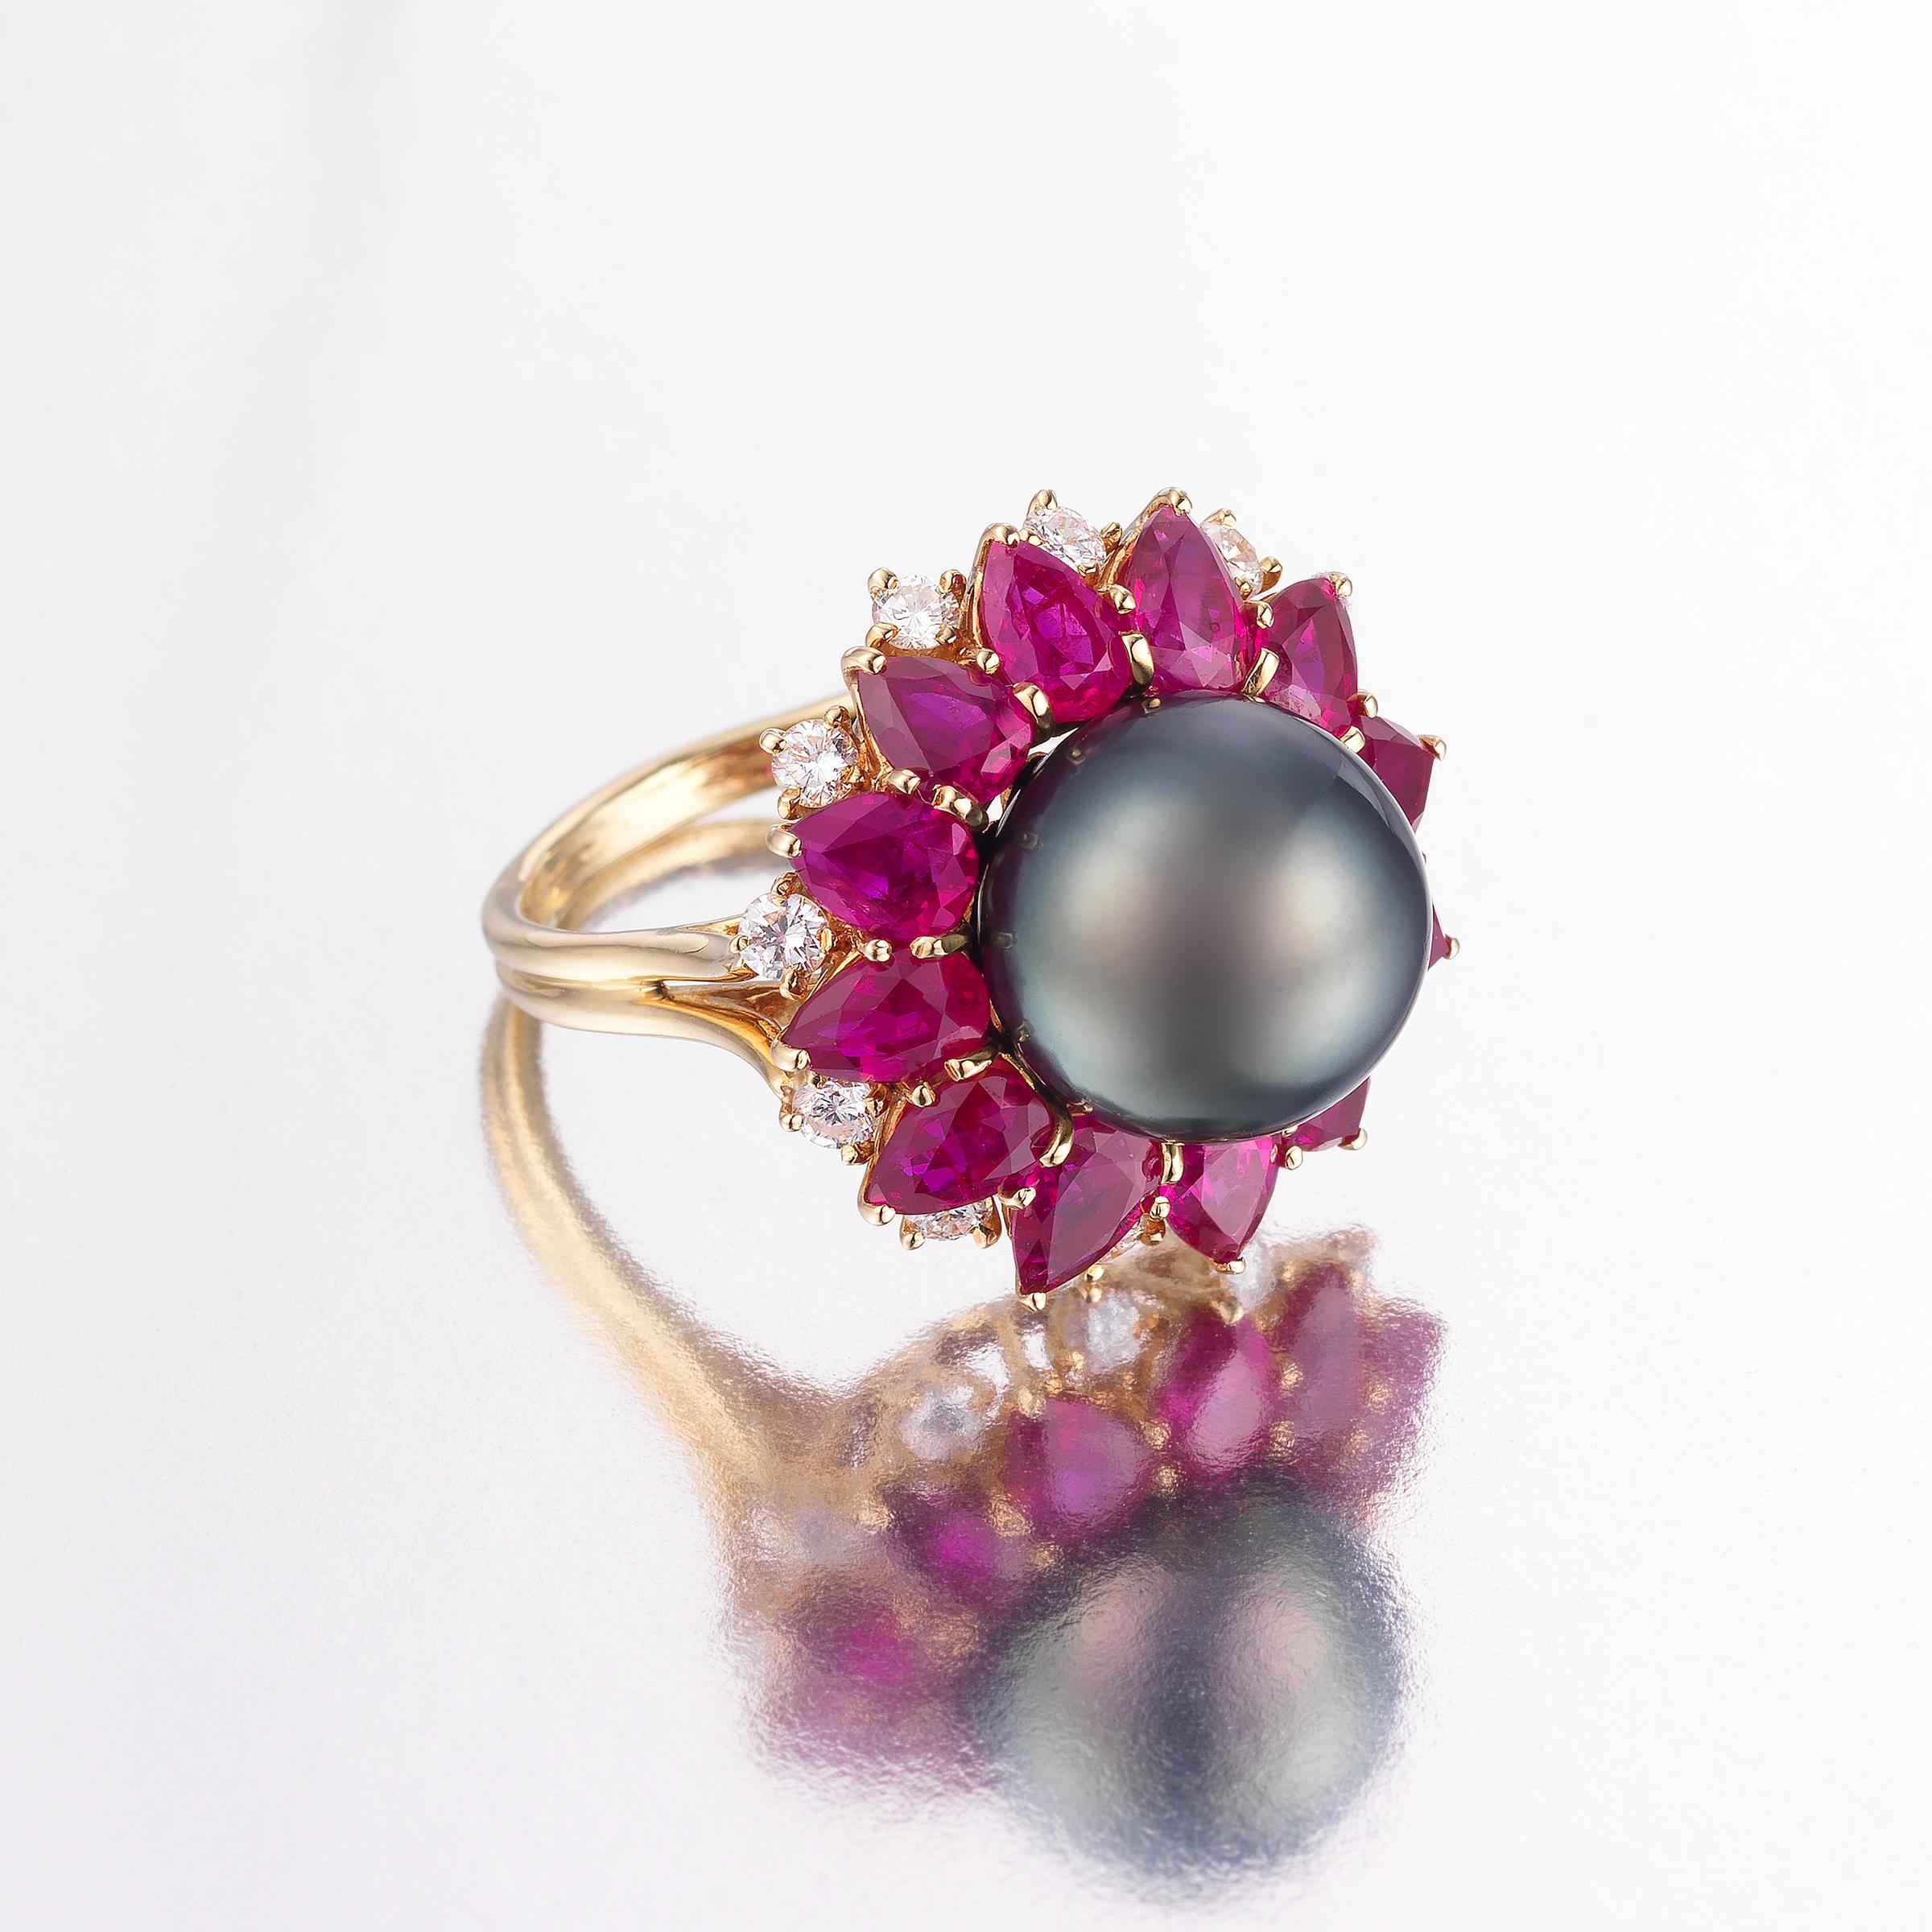 Splendid one-of-a-kind Harry Winston ring radiating 1970s glamour and showcasing approximately 5 carats of vividly-hued rubies and 1 carat of fine white diamonds, along with an eye-catching black Tahitian pearl that completes a bold and striking